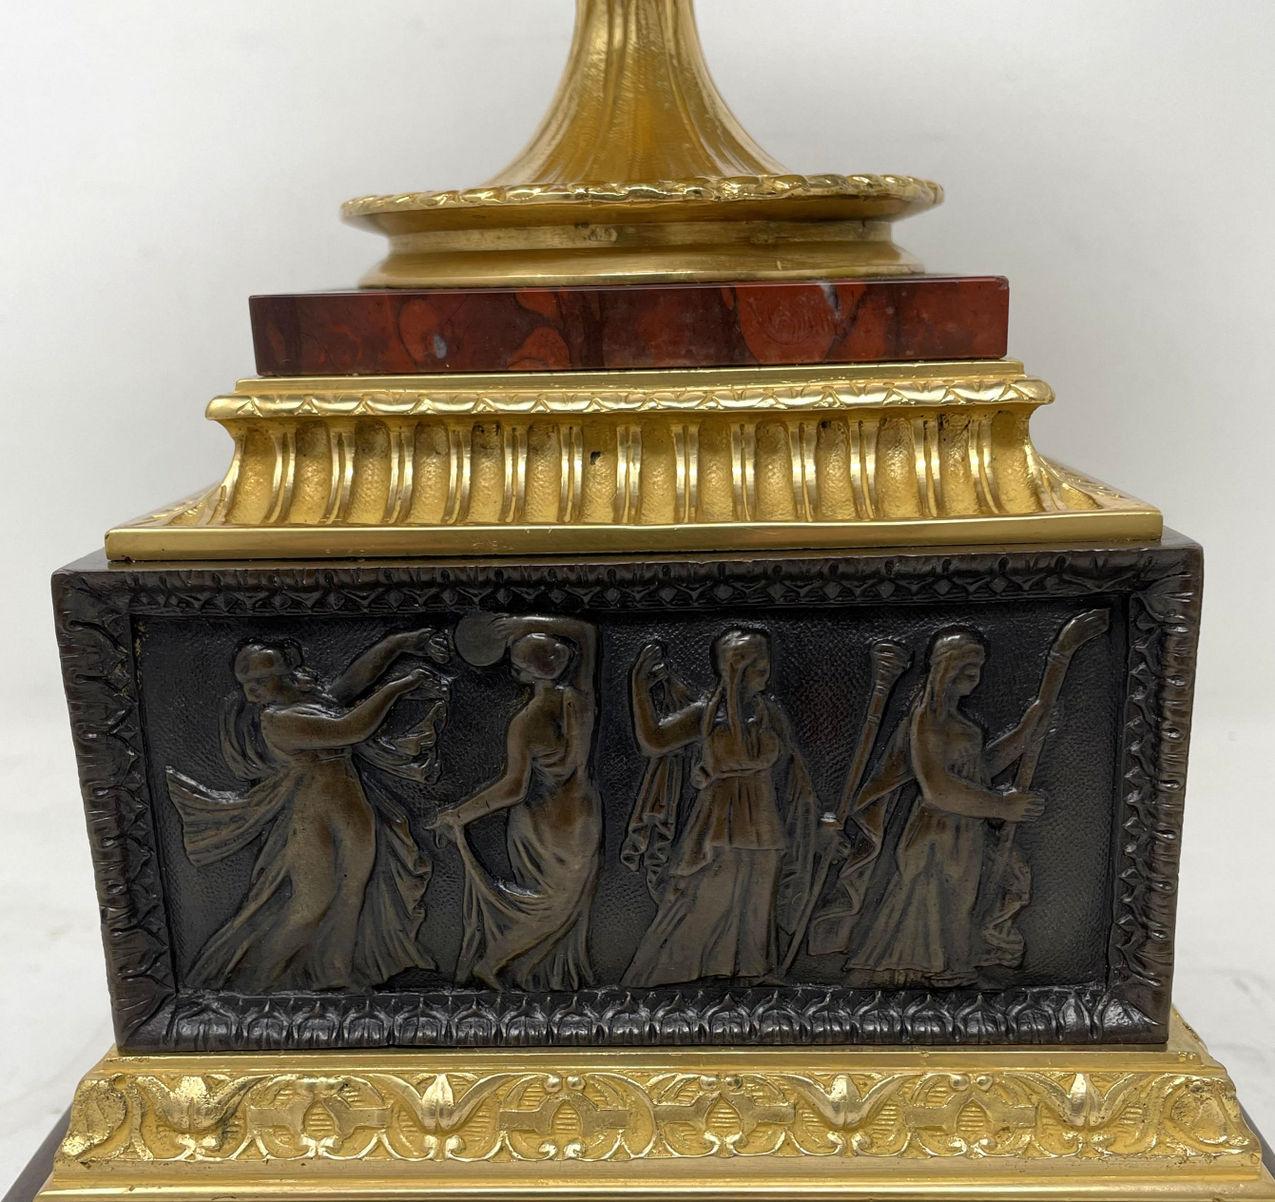 Antique French Grand Tour Ormolu Bronze Dore Marble Urn Vase Centerpiece 19thC In Good Condition For Sale In Dublin, Ireland